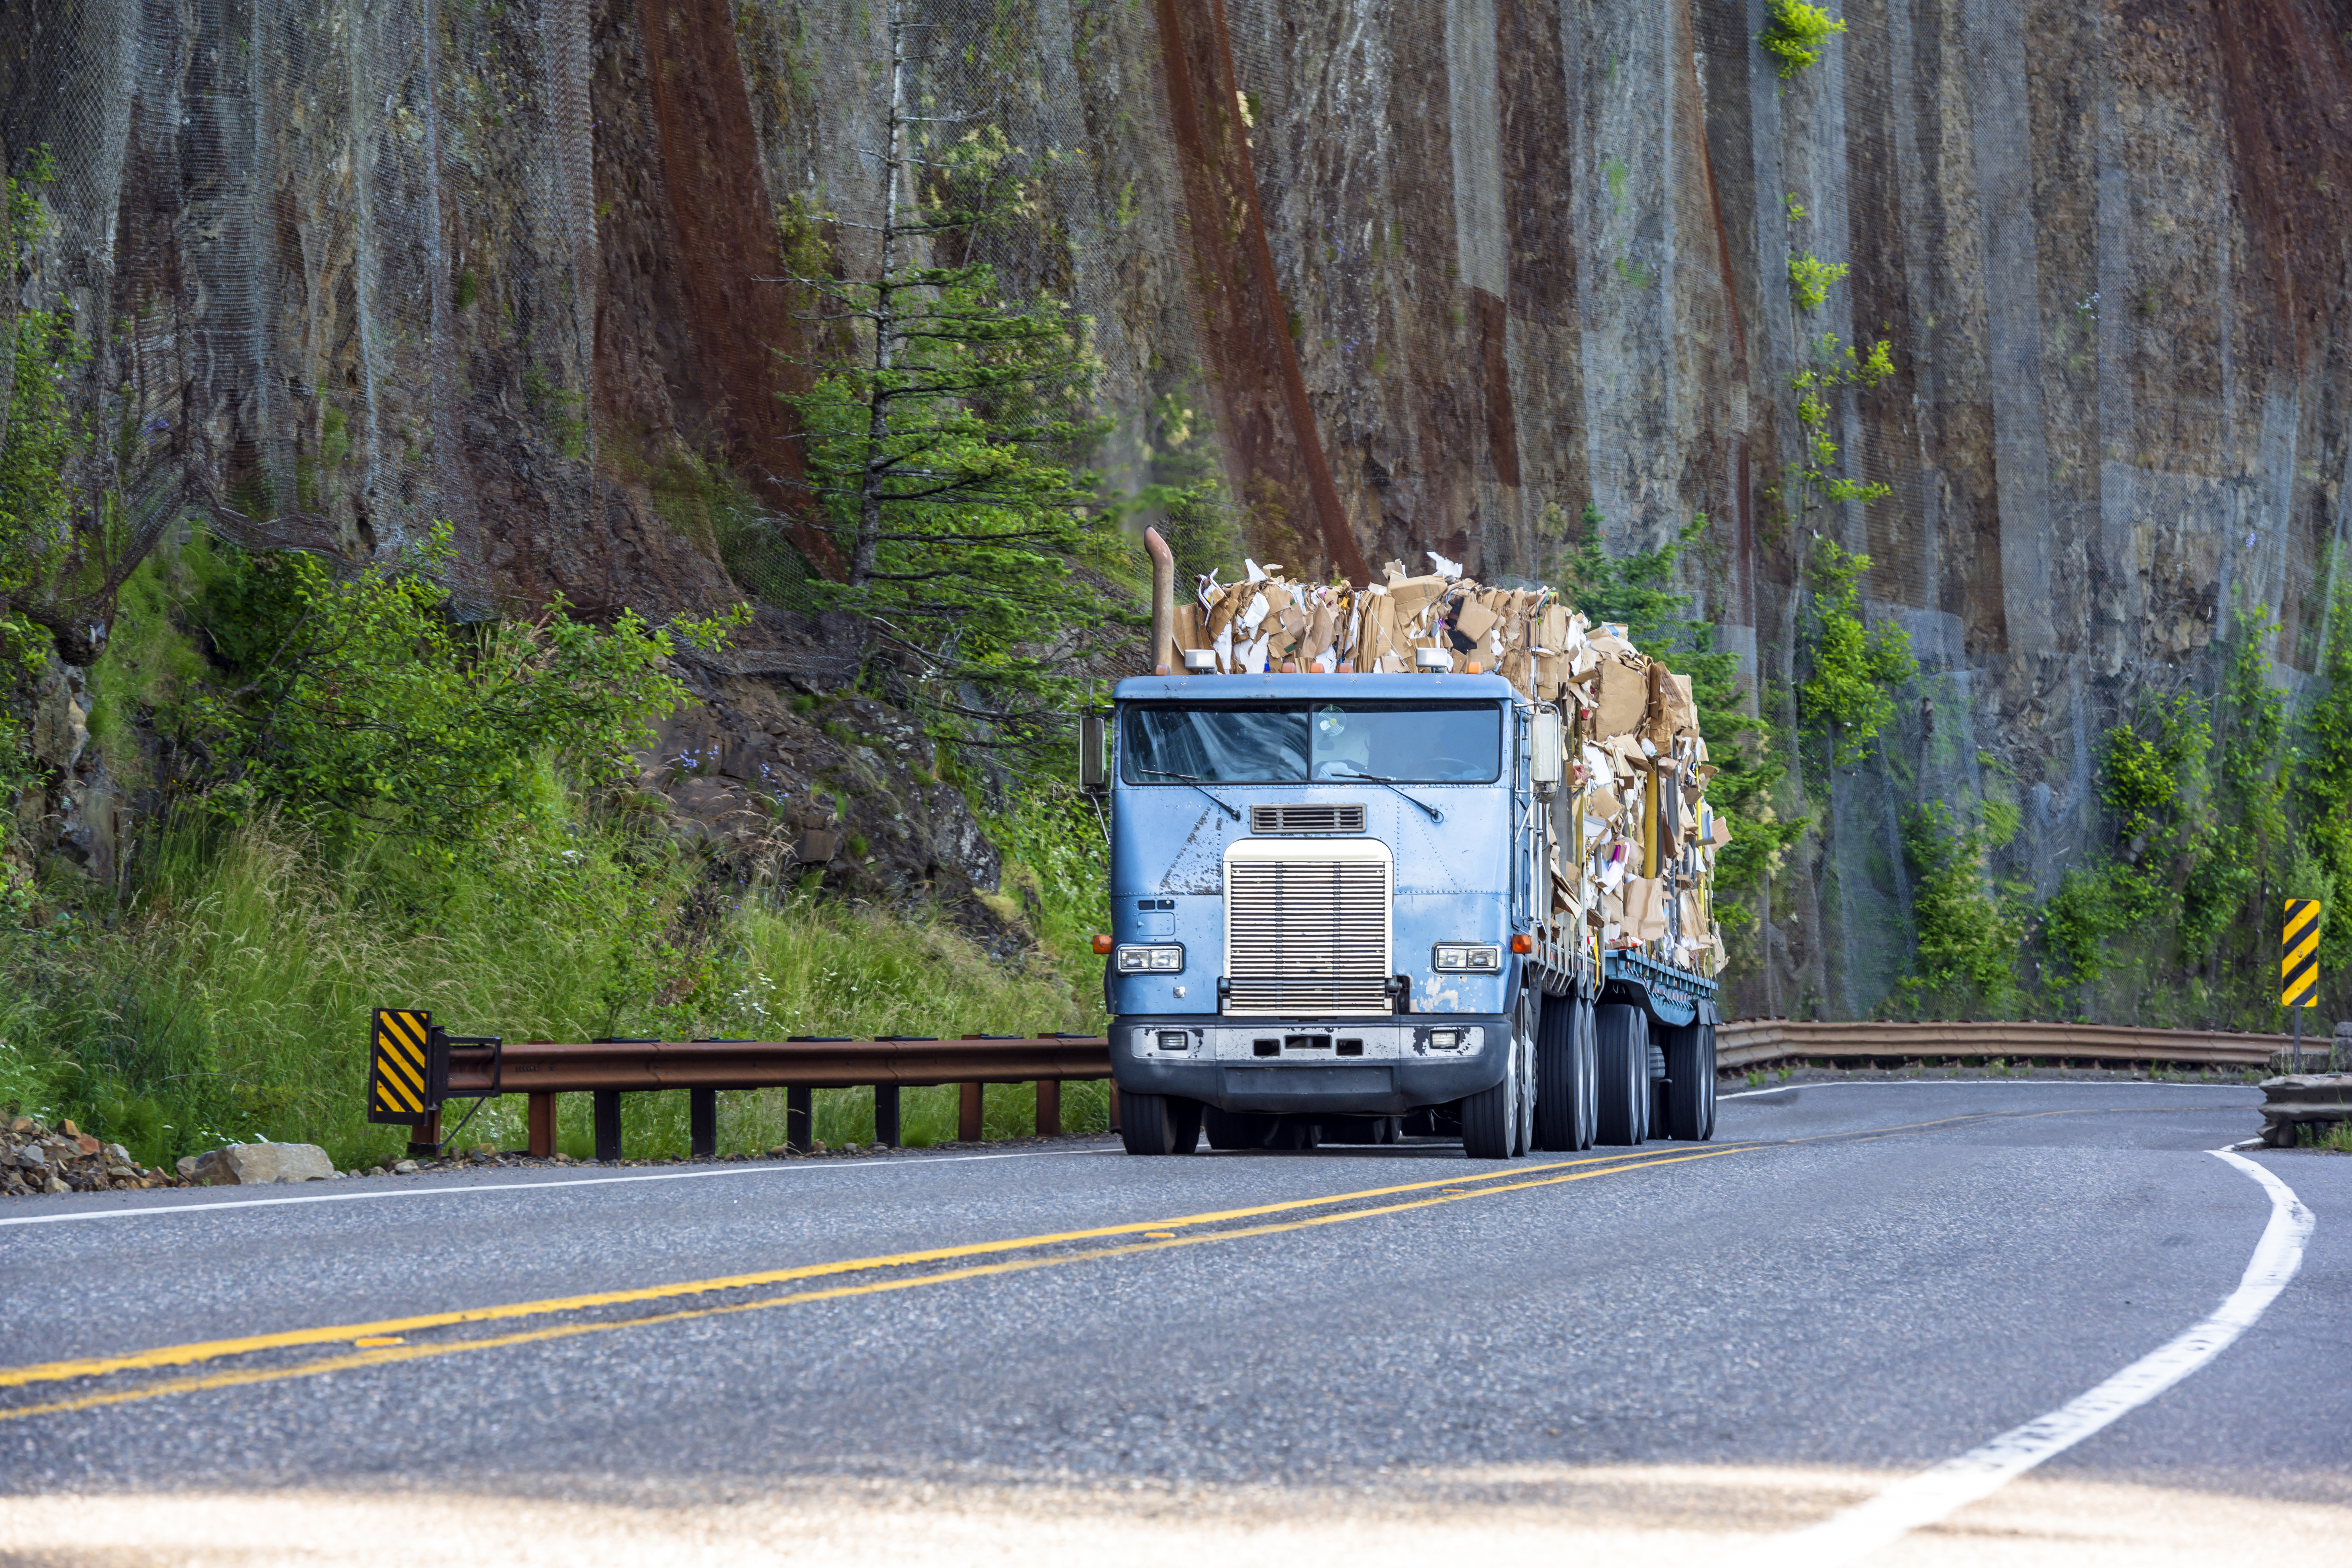 Old big rig cab-over semi truck transporting paper recycling on flat bed semi trailer driving on mountain winding road with rock wall.